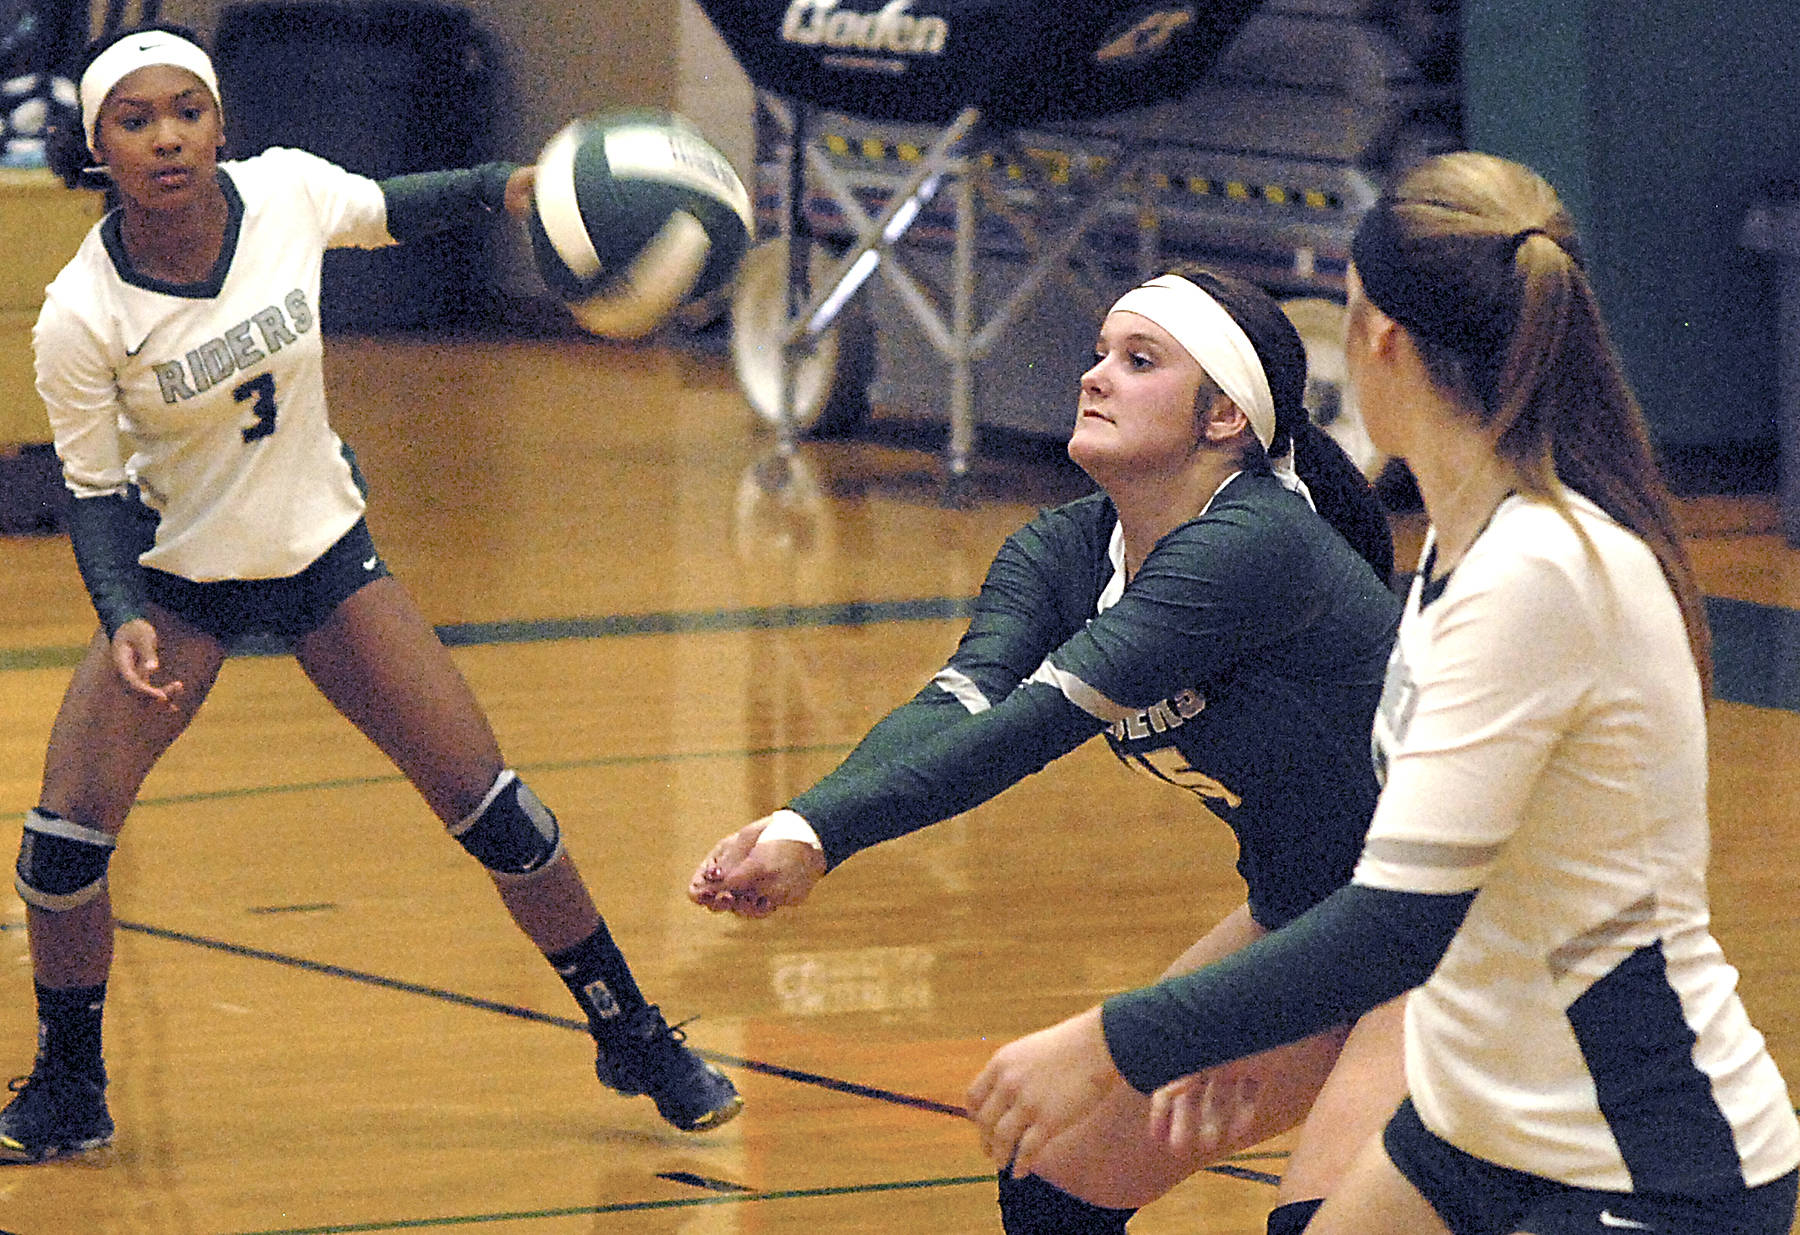 Keith Thorpe/Peninsula Daily News                                Port Angeles’ Brennan Gray, center, sets the ball as teammates Lannie Lyamba, left, and Devin Edwards look on in the second game of Tuesday night’s match against Bremerton at Port Angeles High School.